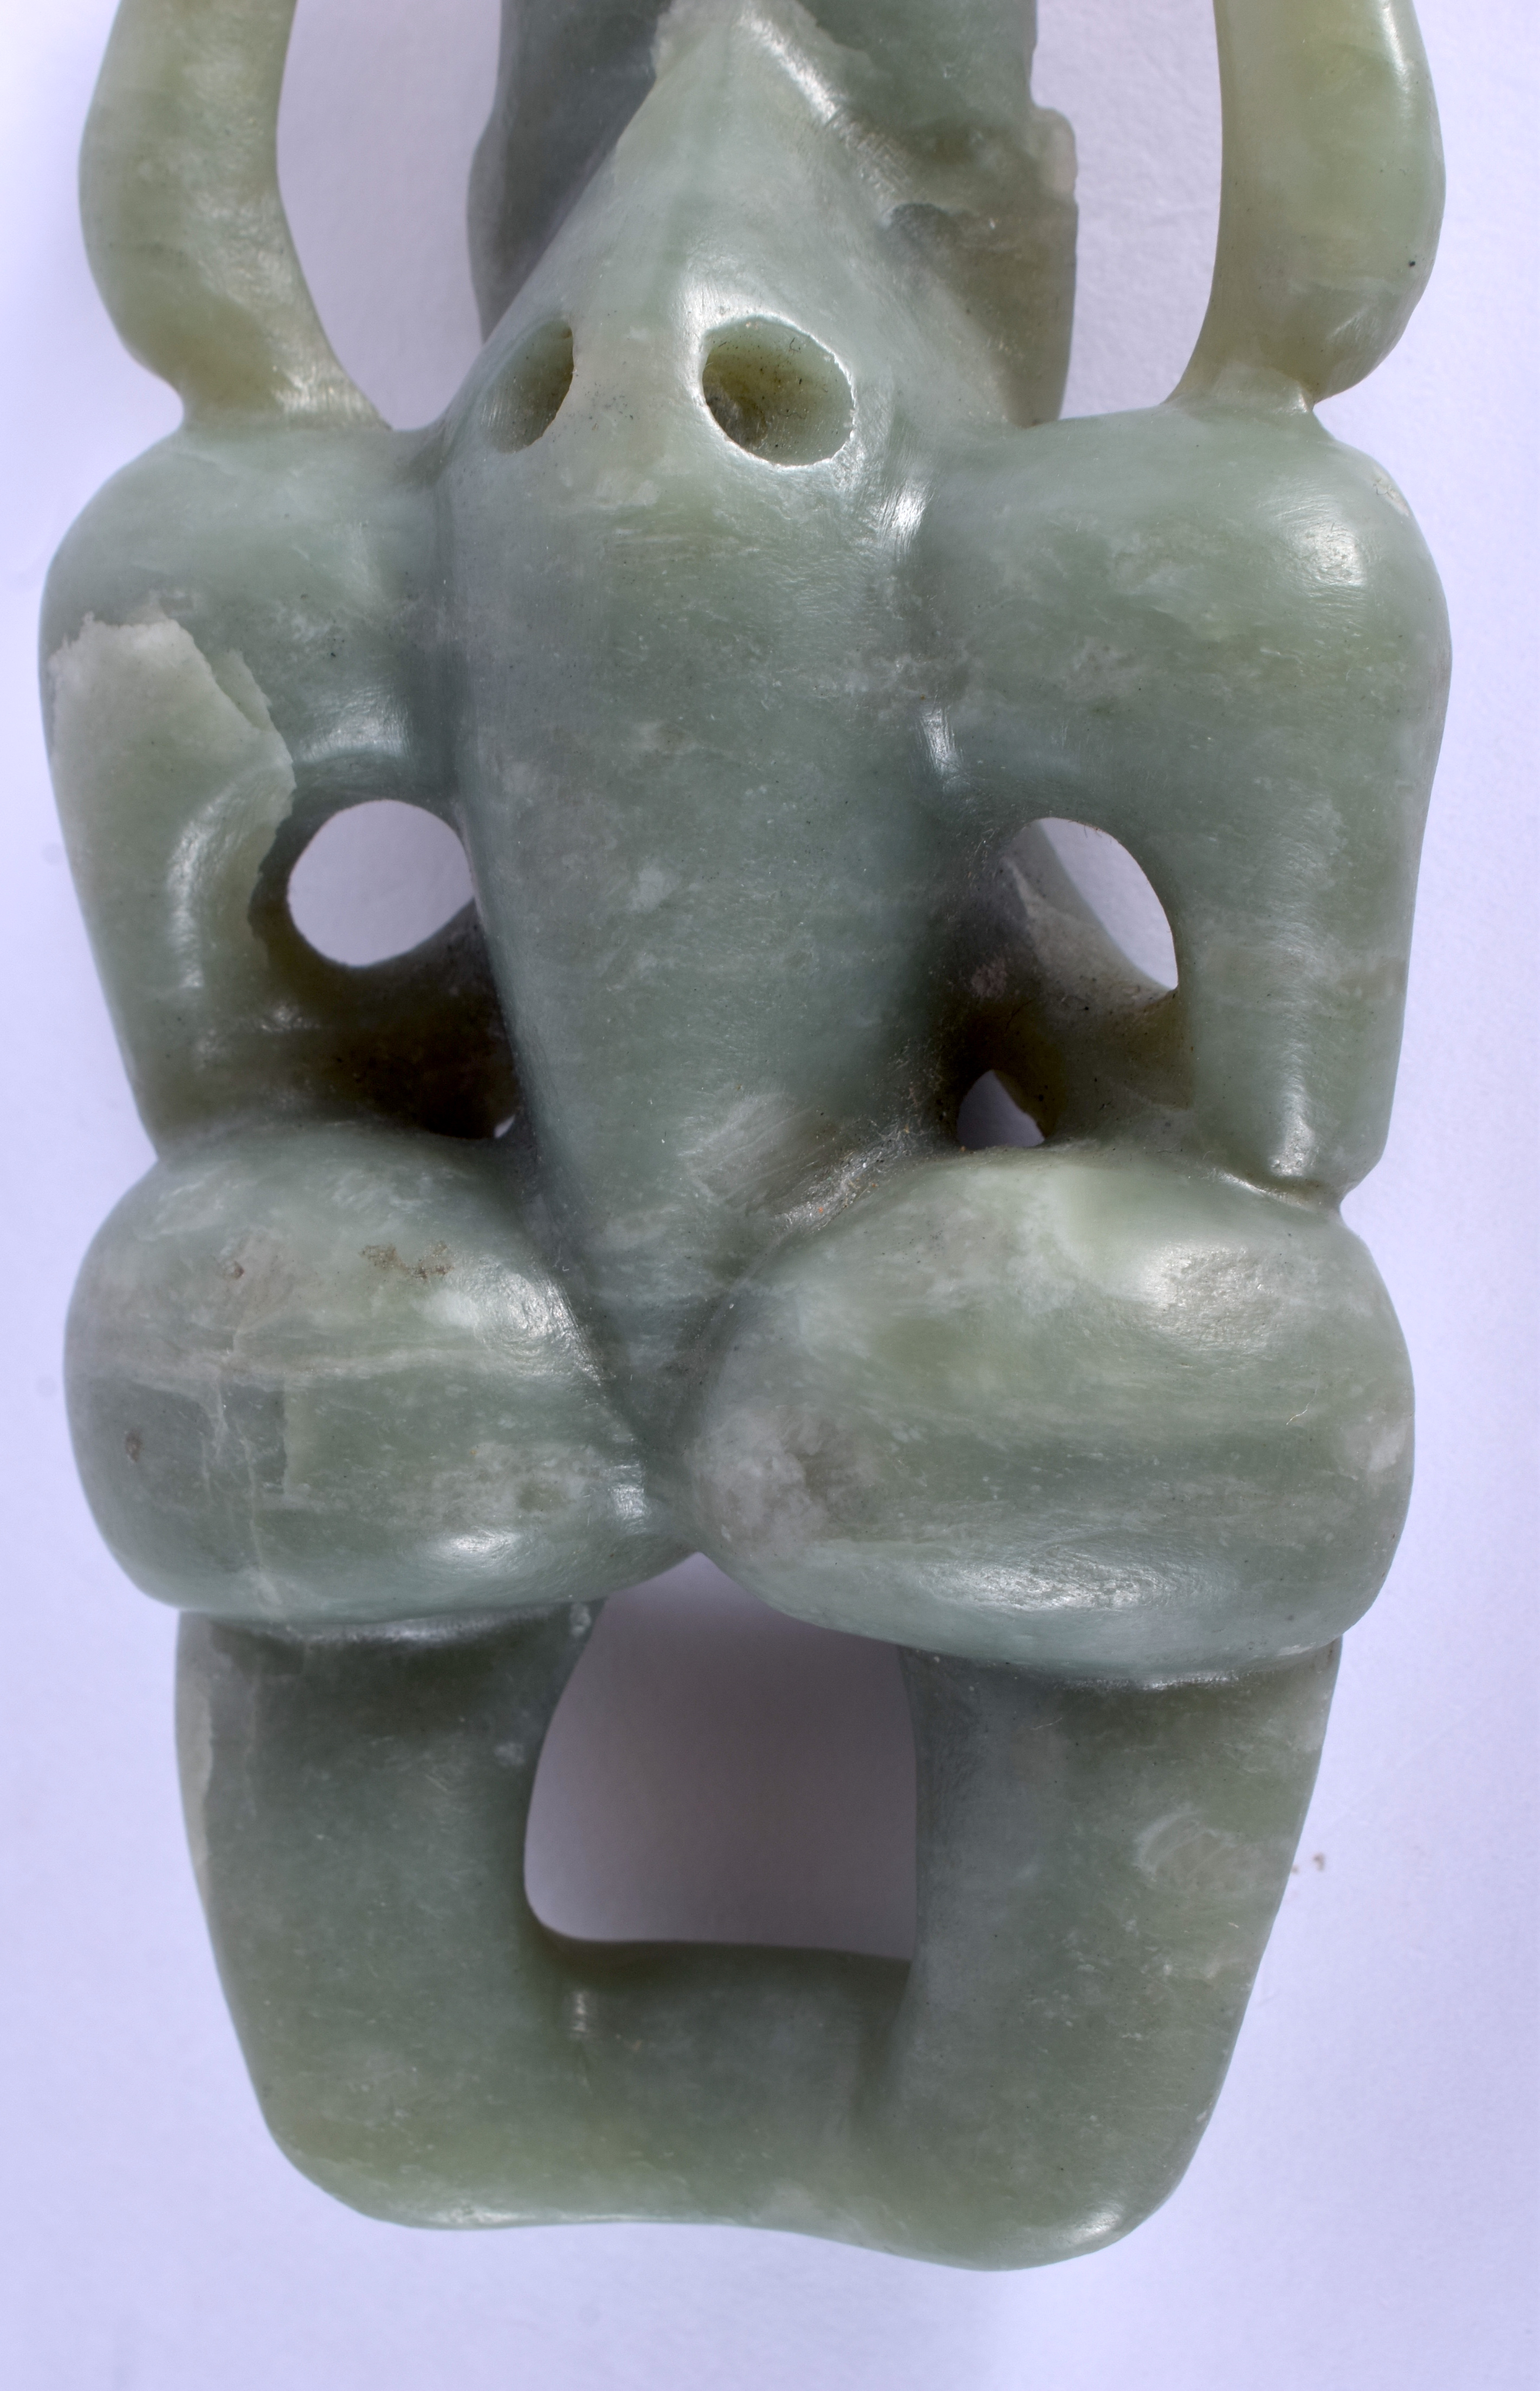 A CHINESE CARVED HONGSHAN CULTURE CARVED JADE FIGURE OF A SUN GOD possibly Neolithic period. 12 cm x - Image 11 of 11